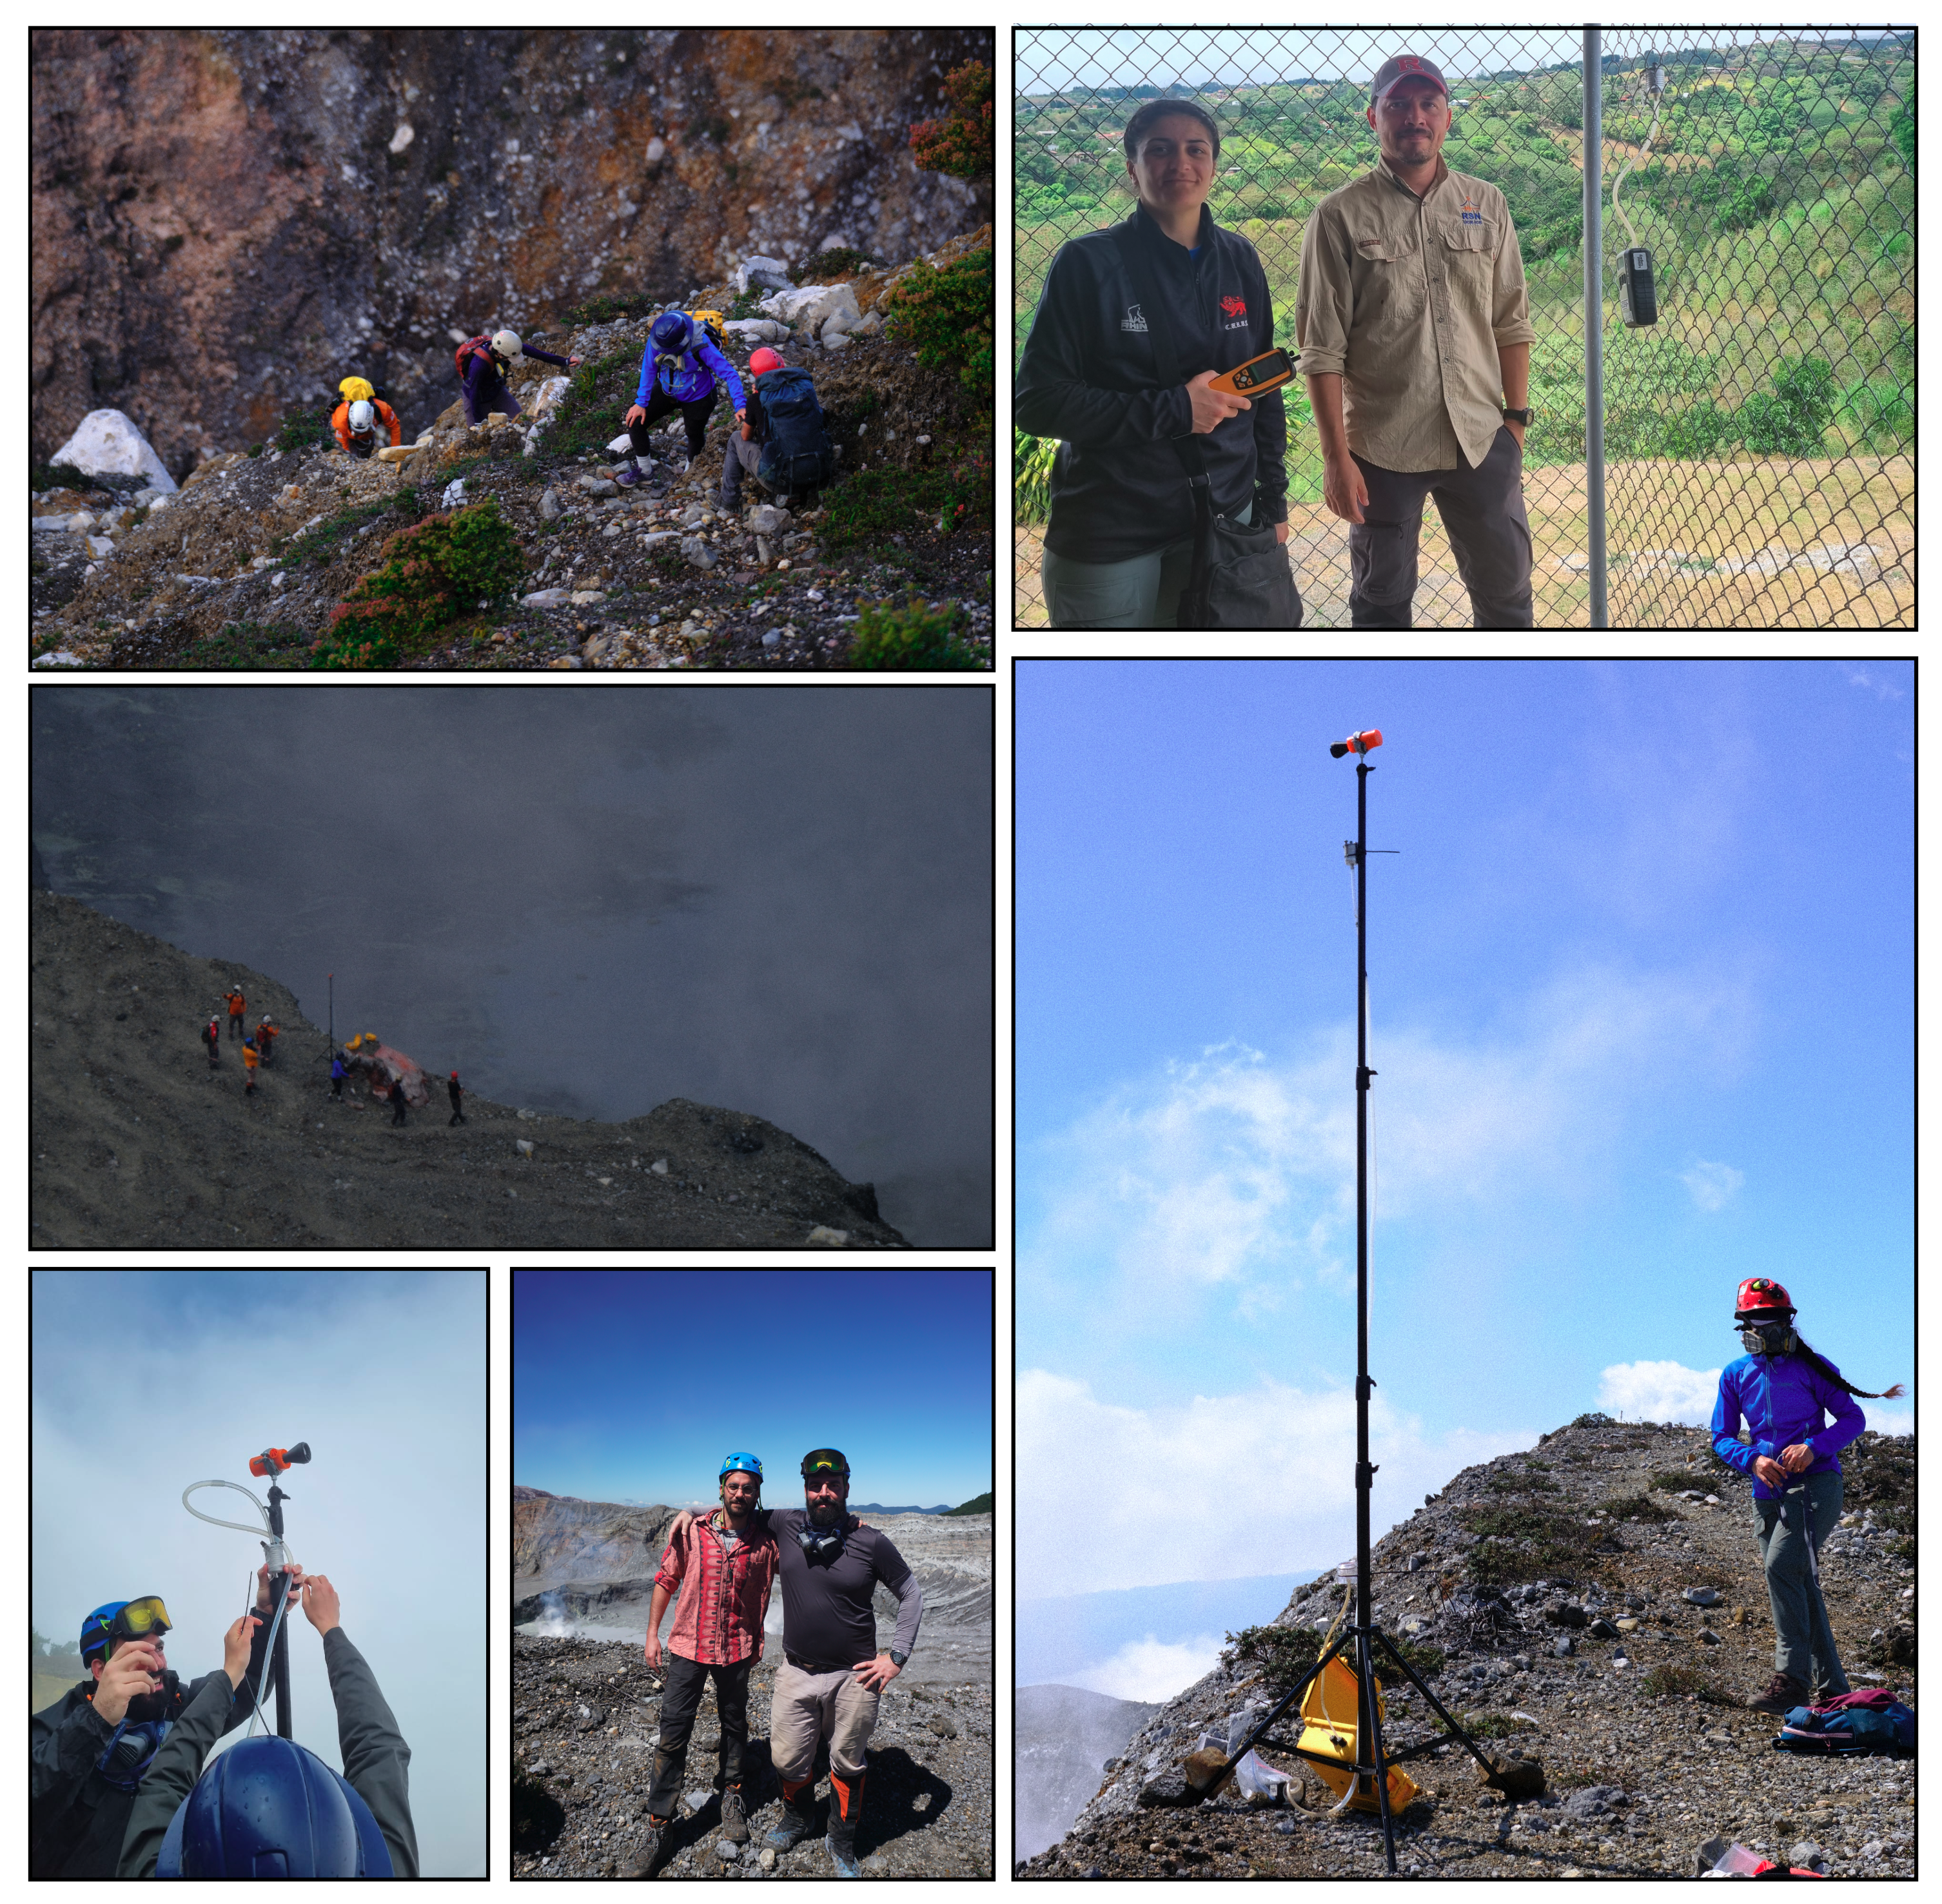 Team Aerosol. Clockwise, from top left: team “Vertical Ascent” hiking out from Poás crater with sampling equipment after successful deployment right next to the plume source. Mushtari Saidikova preparing sampling equipment at a school downwind of the plume. Mushtari Saidikova on the crater rim with sampling equipment deployed. Donato Giovanelli and Bernardo Barosa in front of Poás crater. Donato Giovanelli sets up his low-cost sampling pump with specially designed 3-D printed fitting on a tripod. Team Aerosol setting up sampling equipment on the rim above the crater lake accompanied by the Red Cross, OVSICORI scientist Maarten de Moor, and Moore Foundation Program Associate Rebecca Ju.